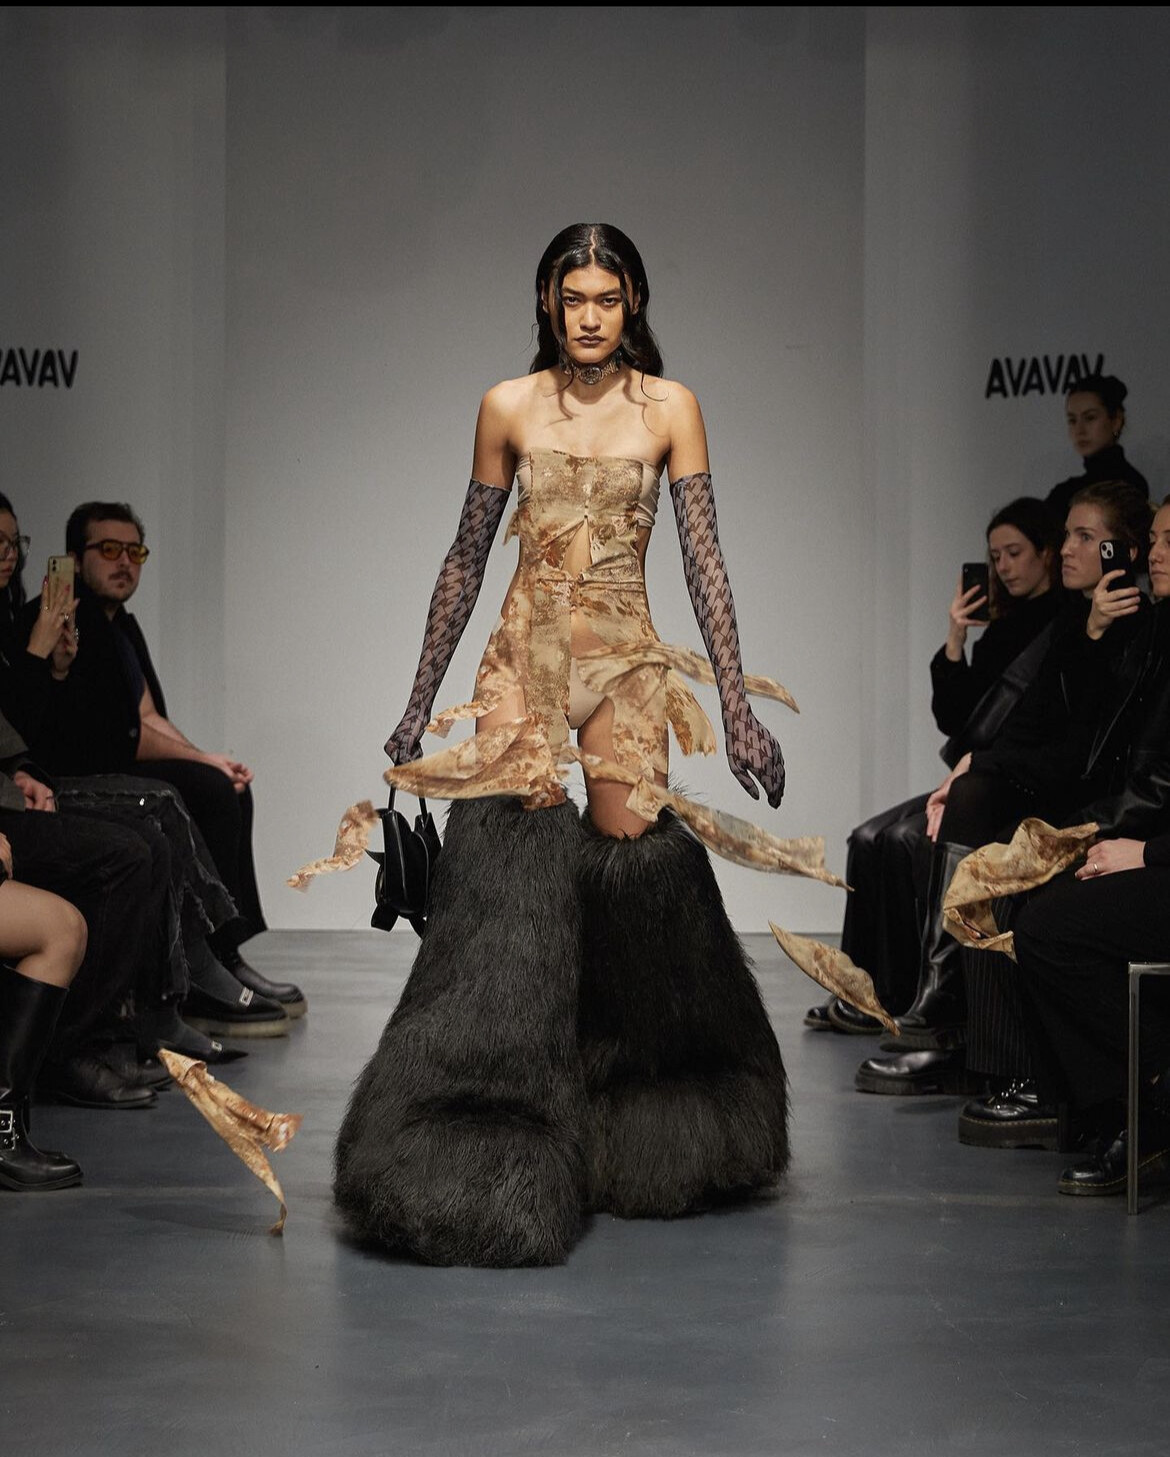 Can AVAVAVs Milan Show Be Seen as a Critique of Fast Fashion? pic